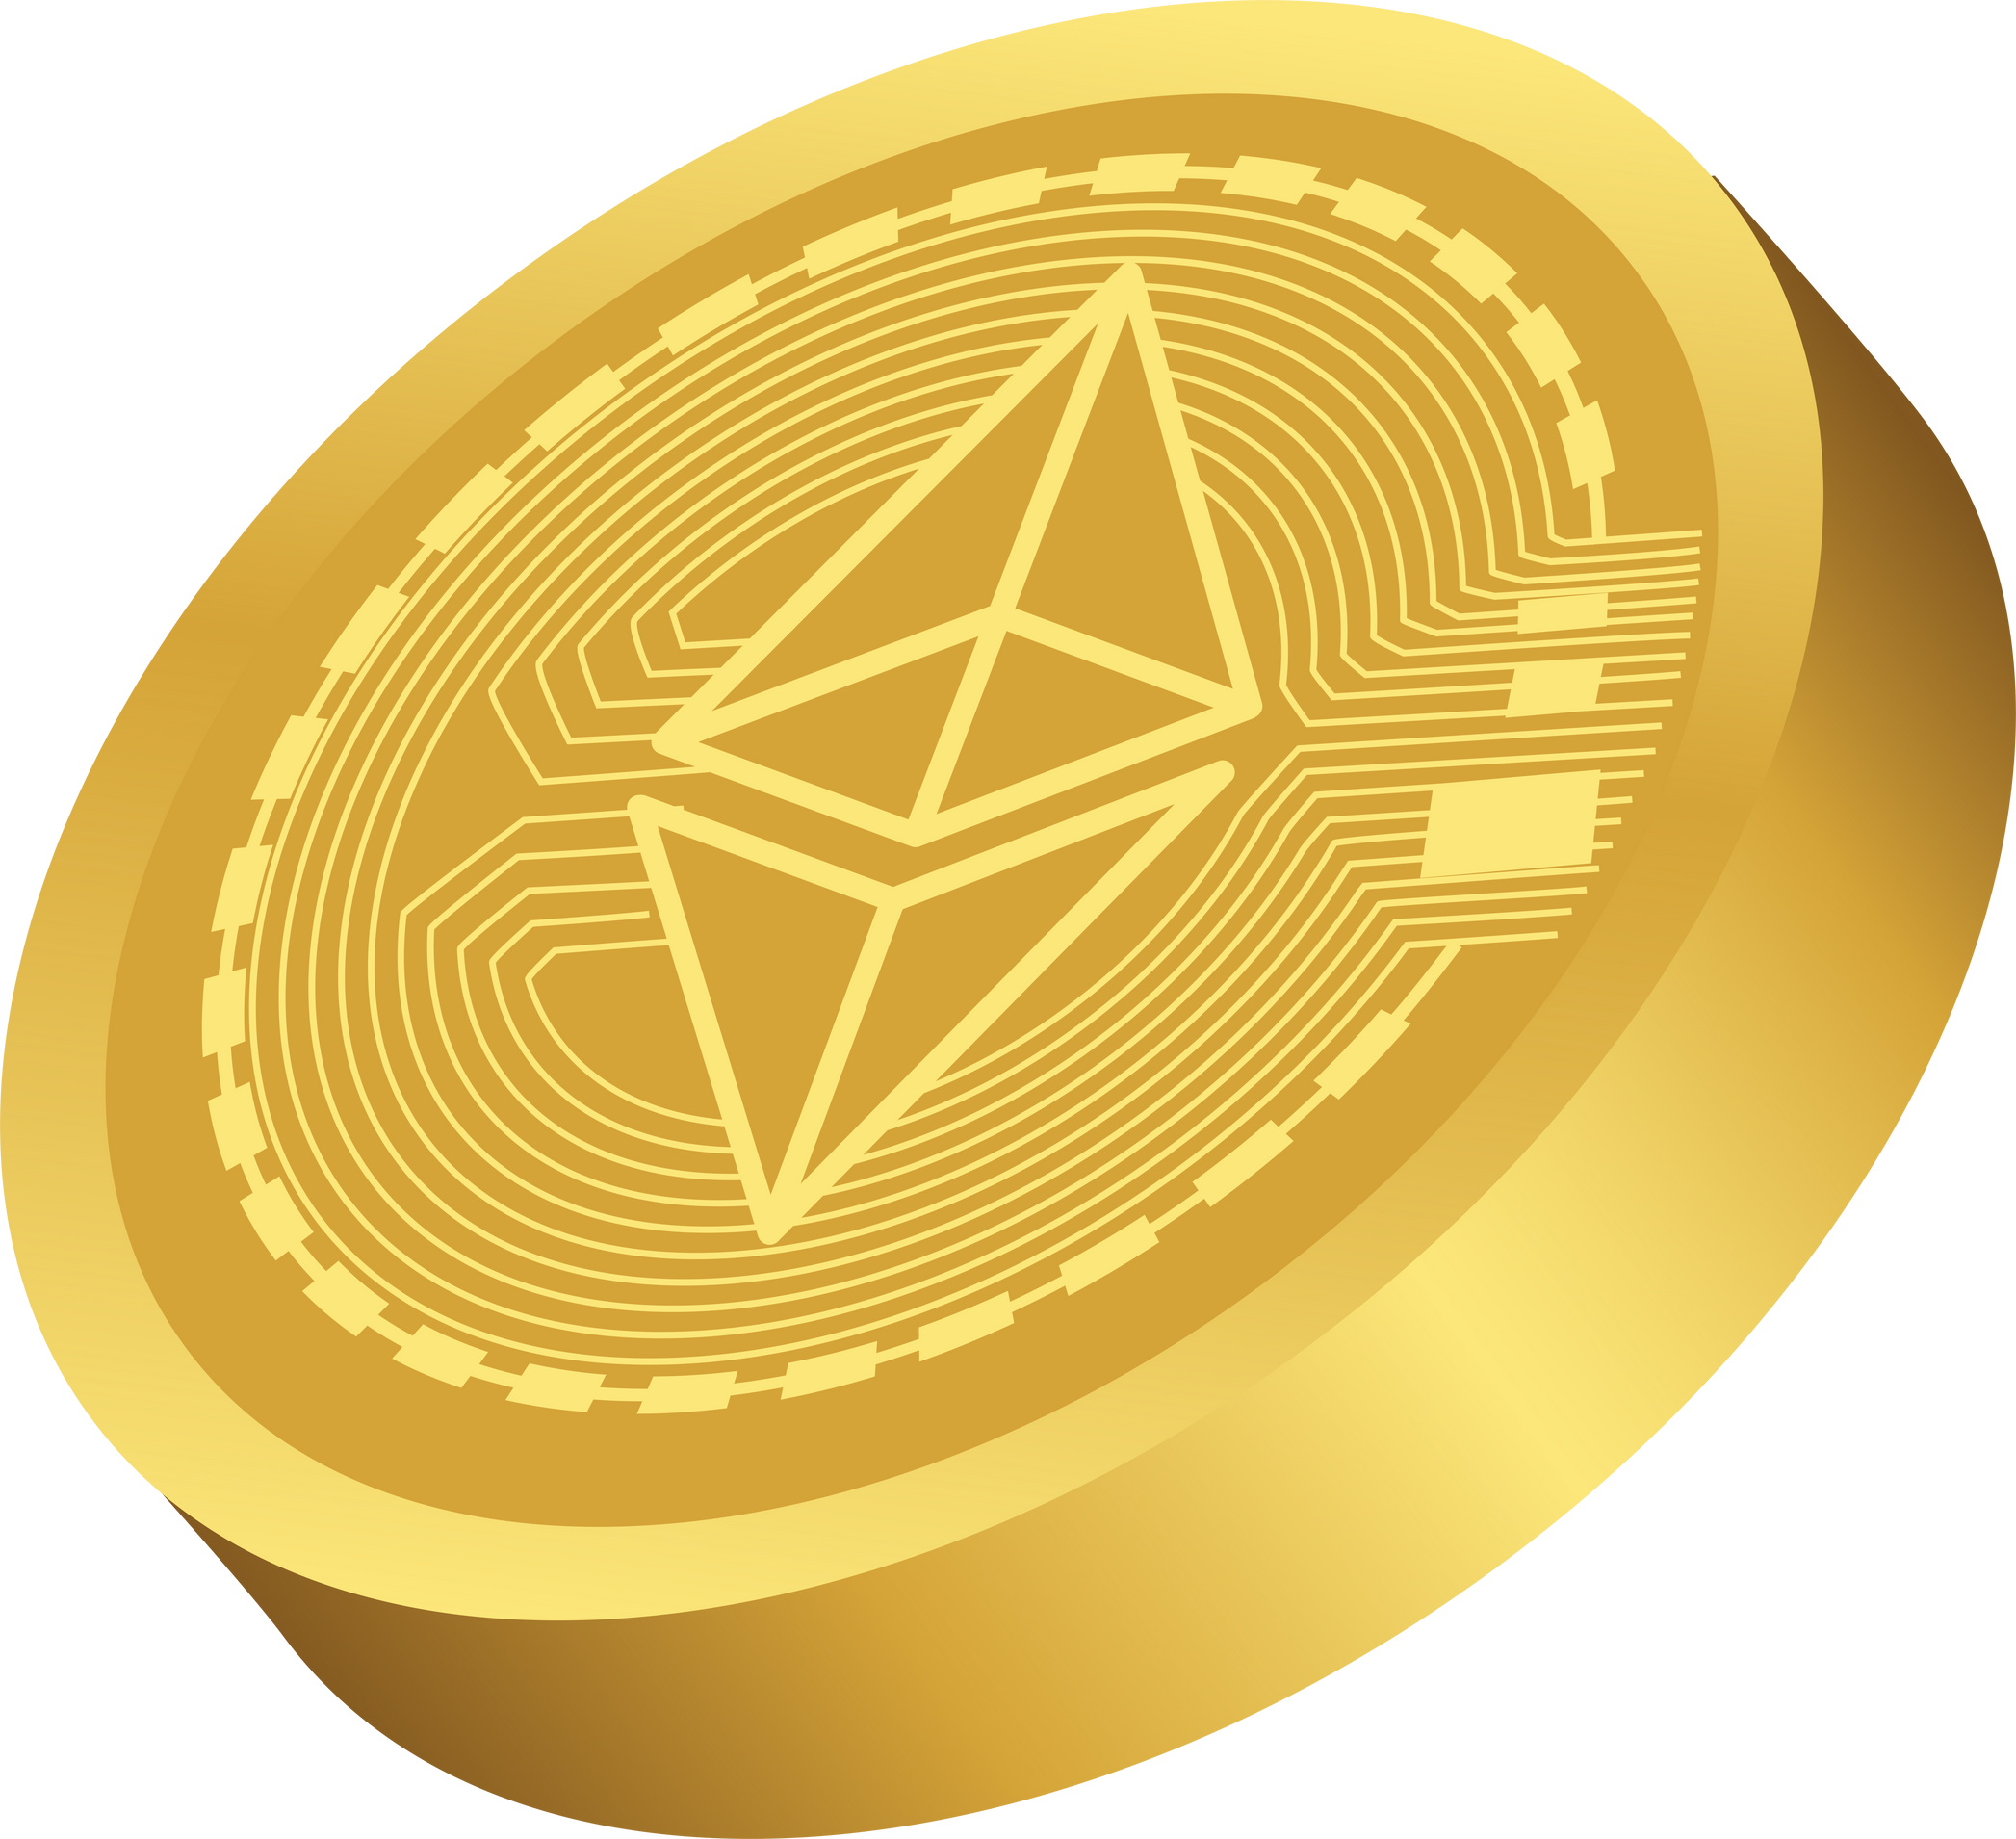 3D ethereum coin side view